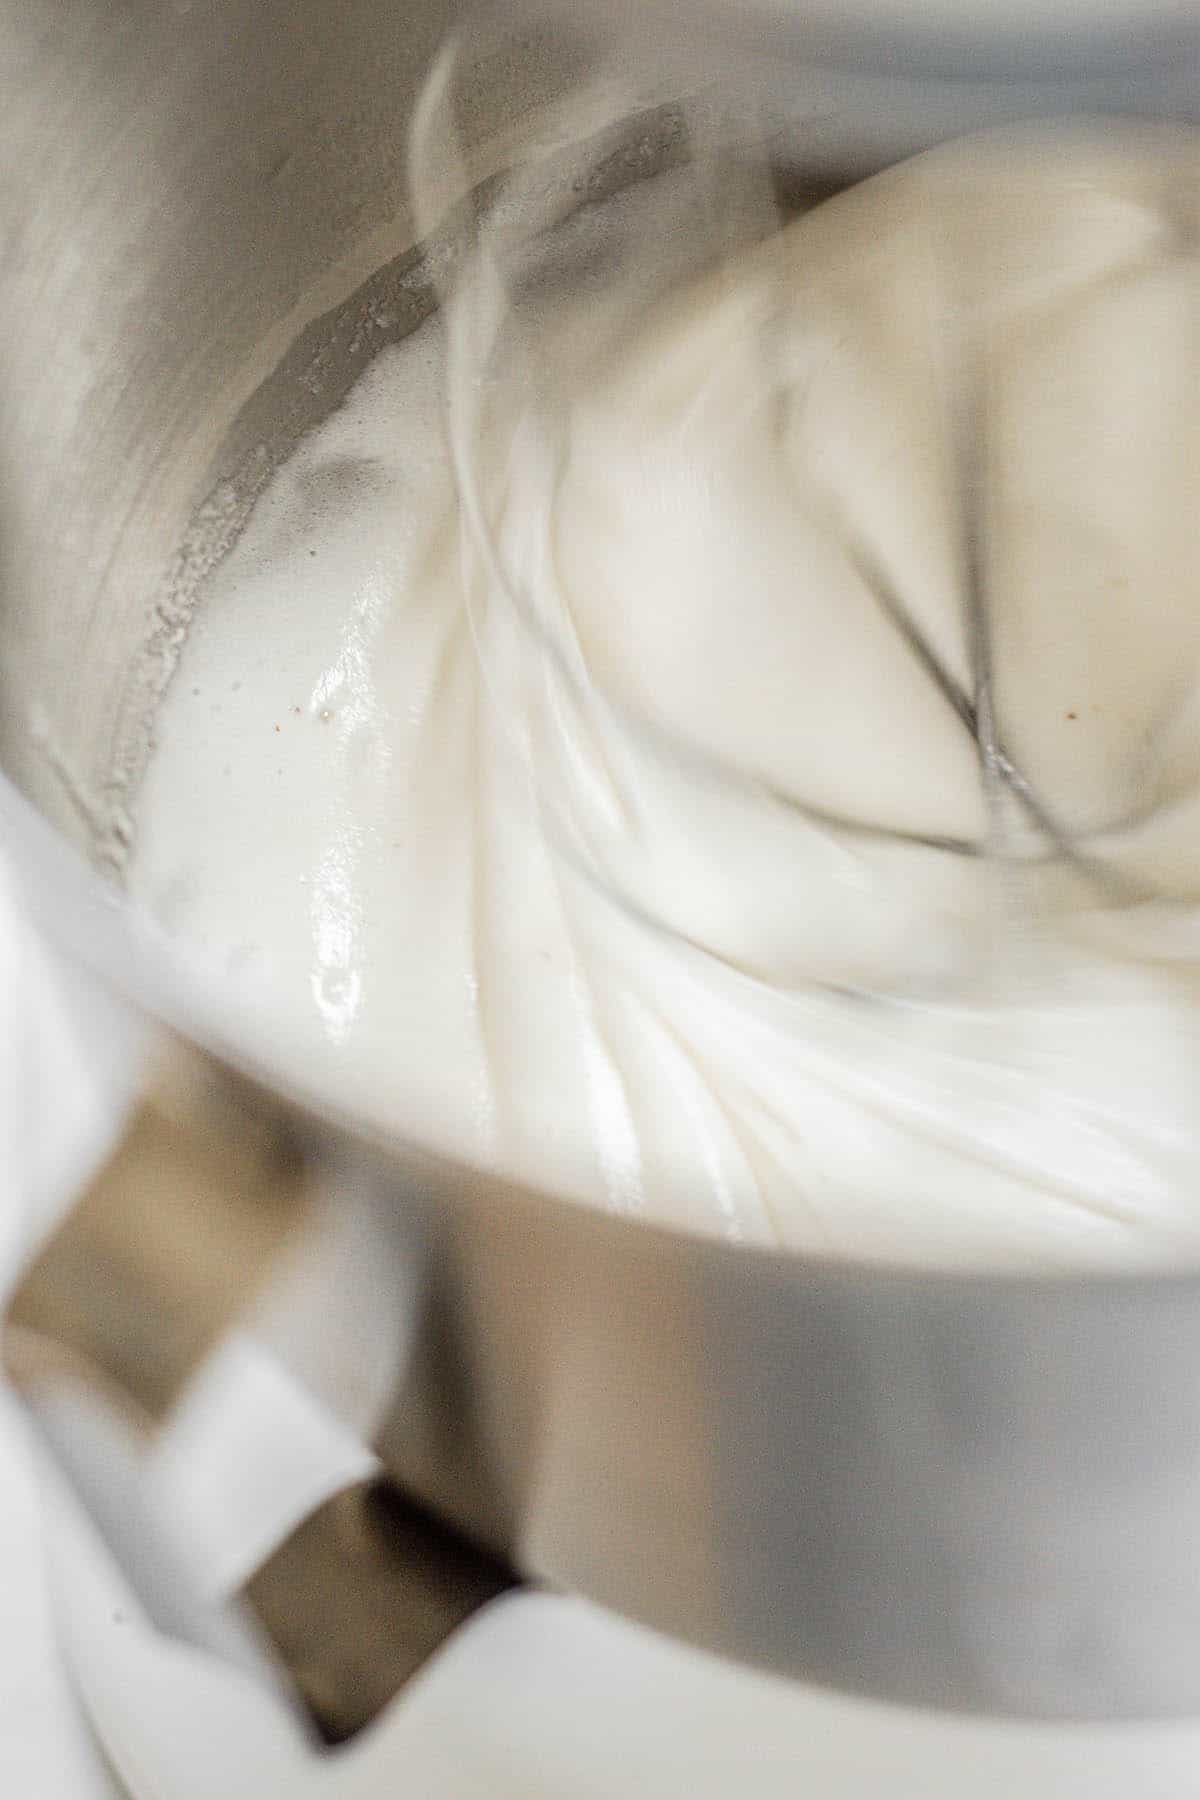 whipping meringue.